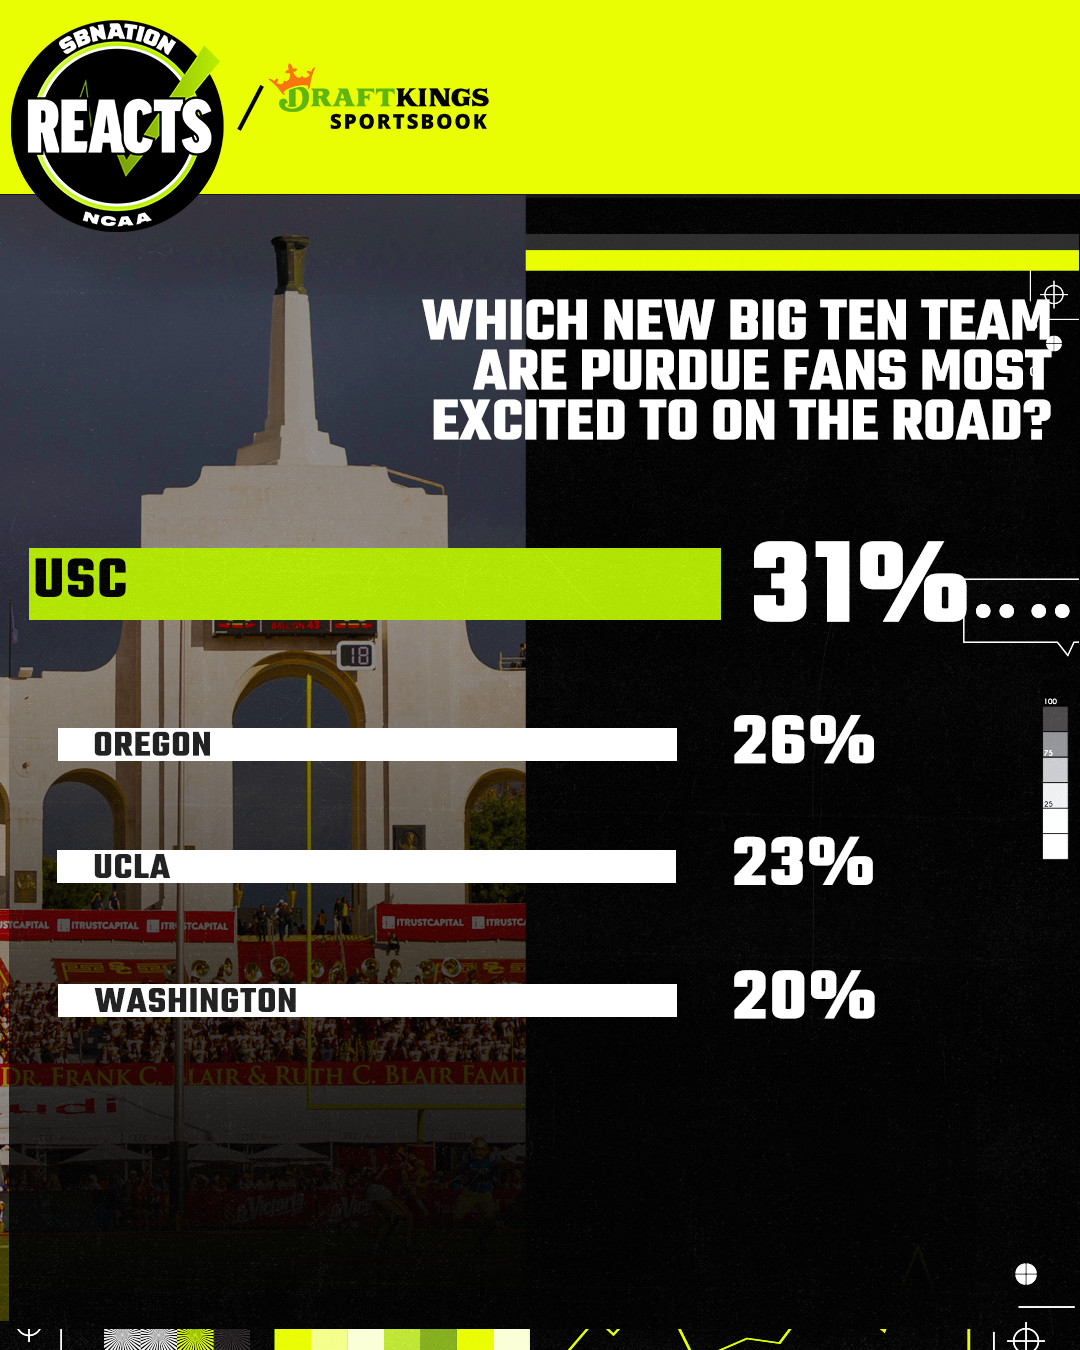 hammer and rails survey results - the new big ten